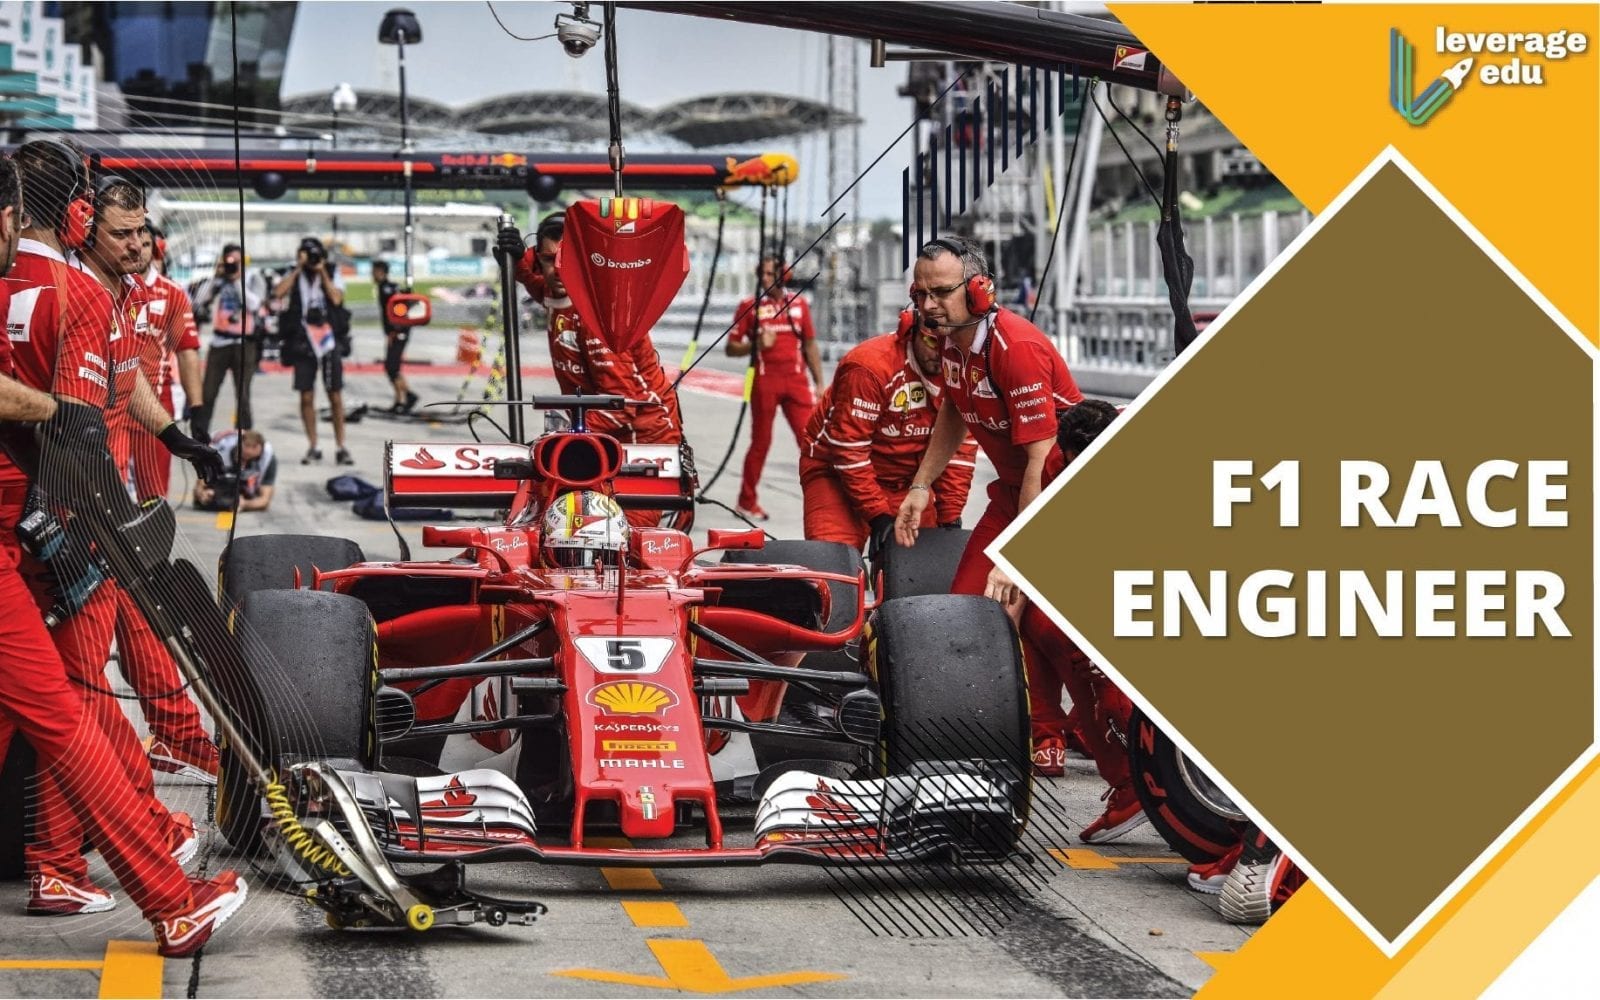 How to an F1 Race Engineer? Leverage Edu